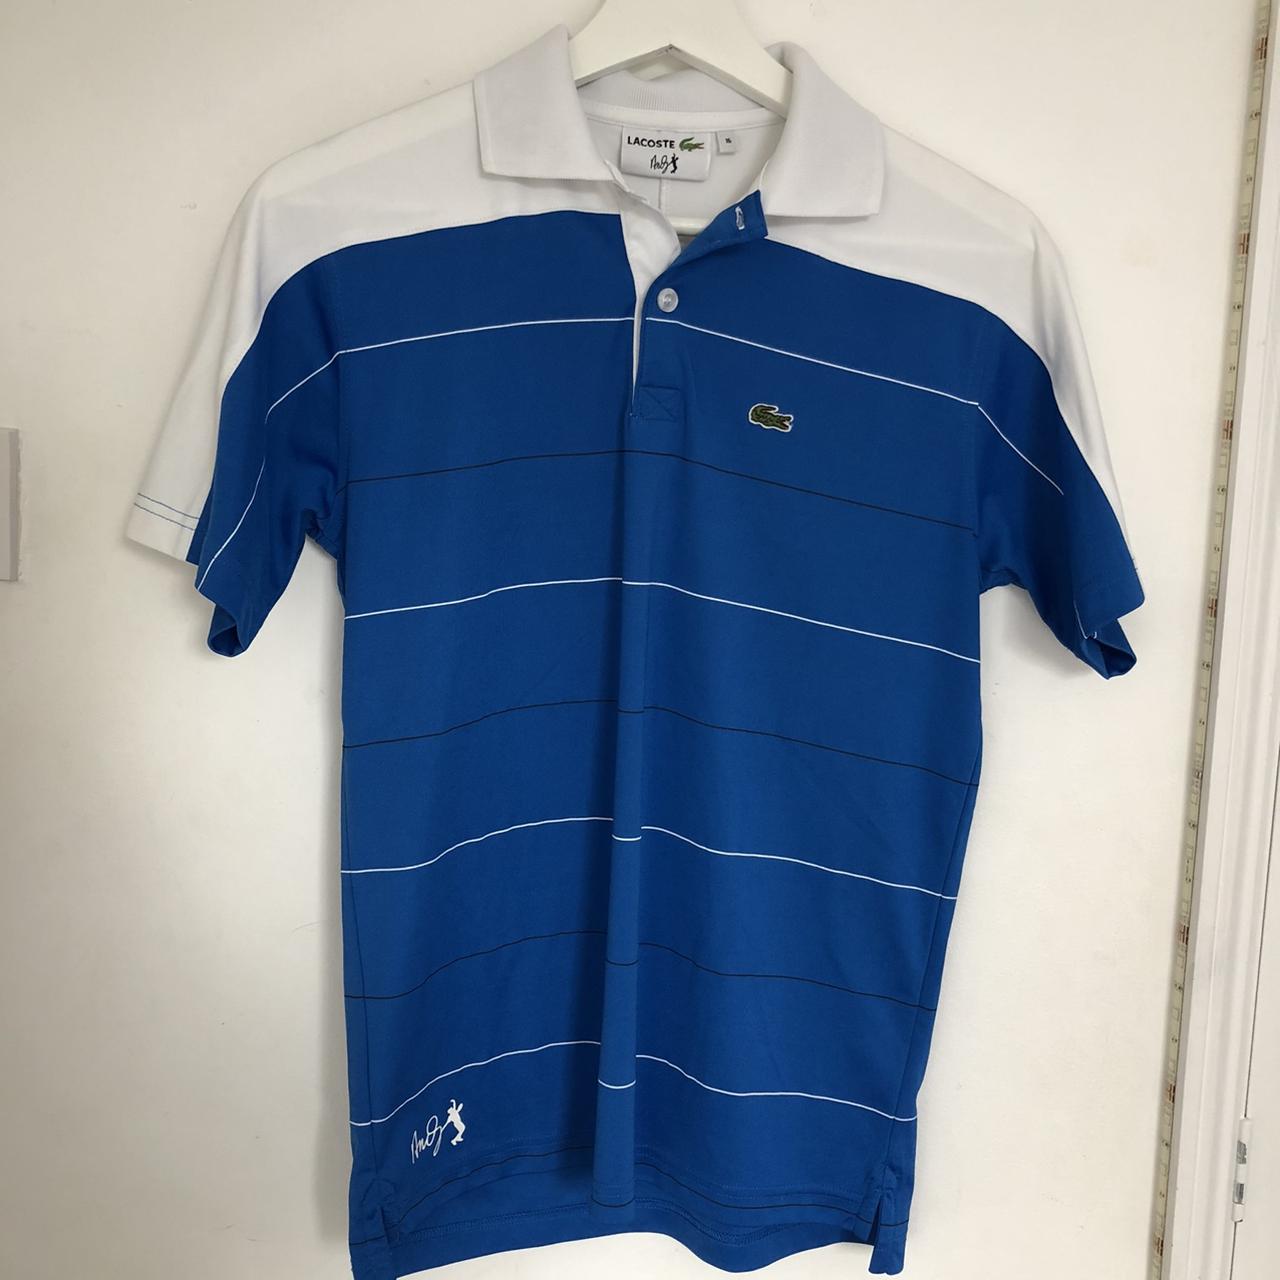 Lacoste Andy Murray tennis polo shirt Boys size 16,... - Depop